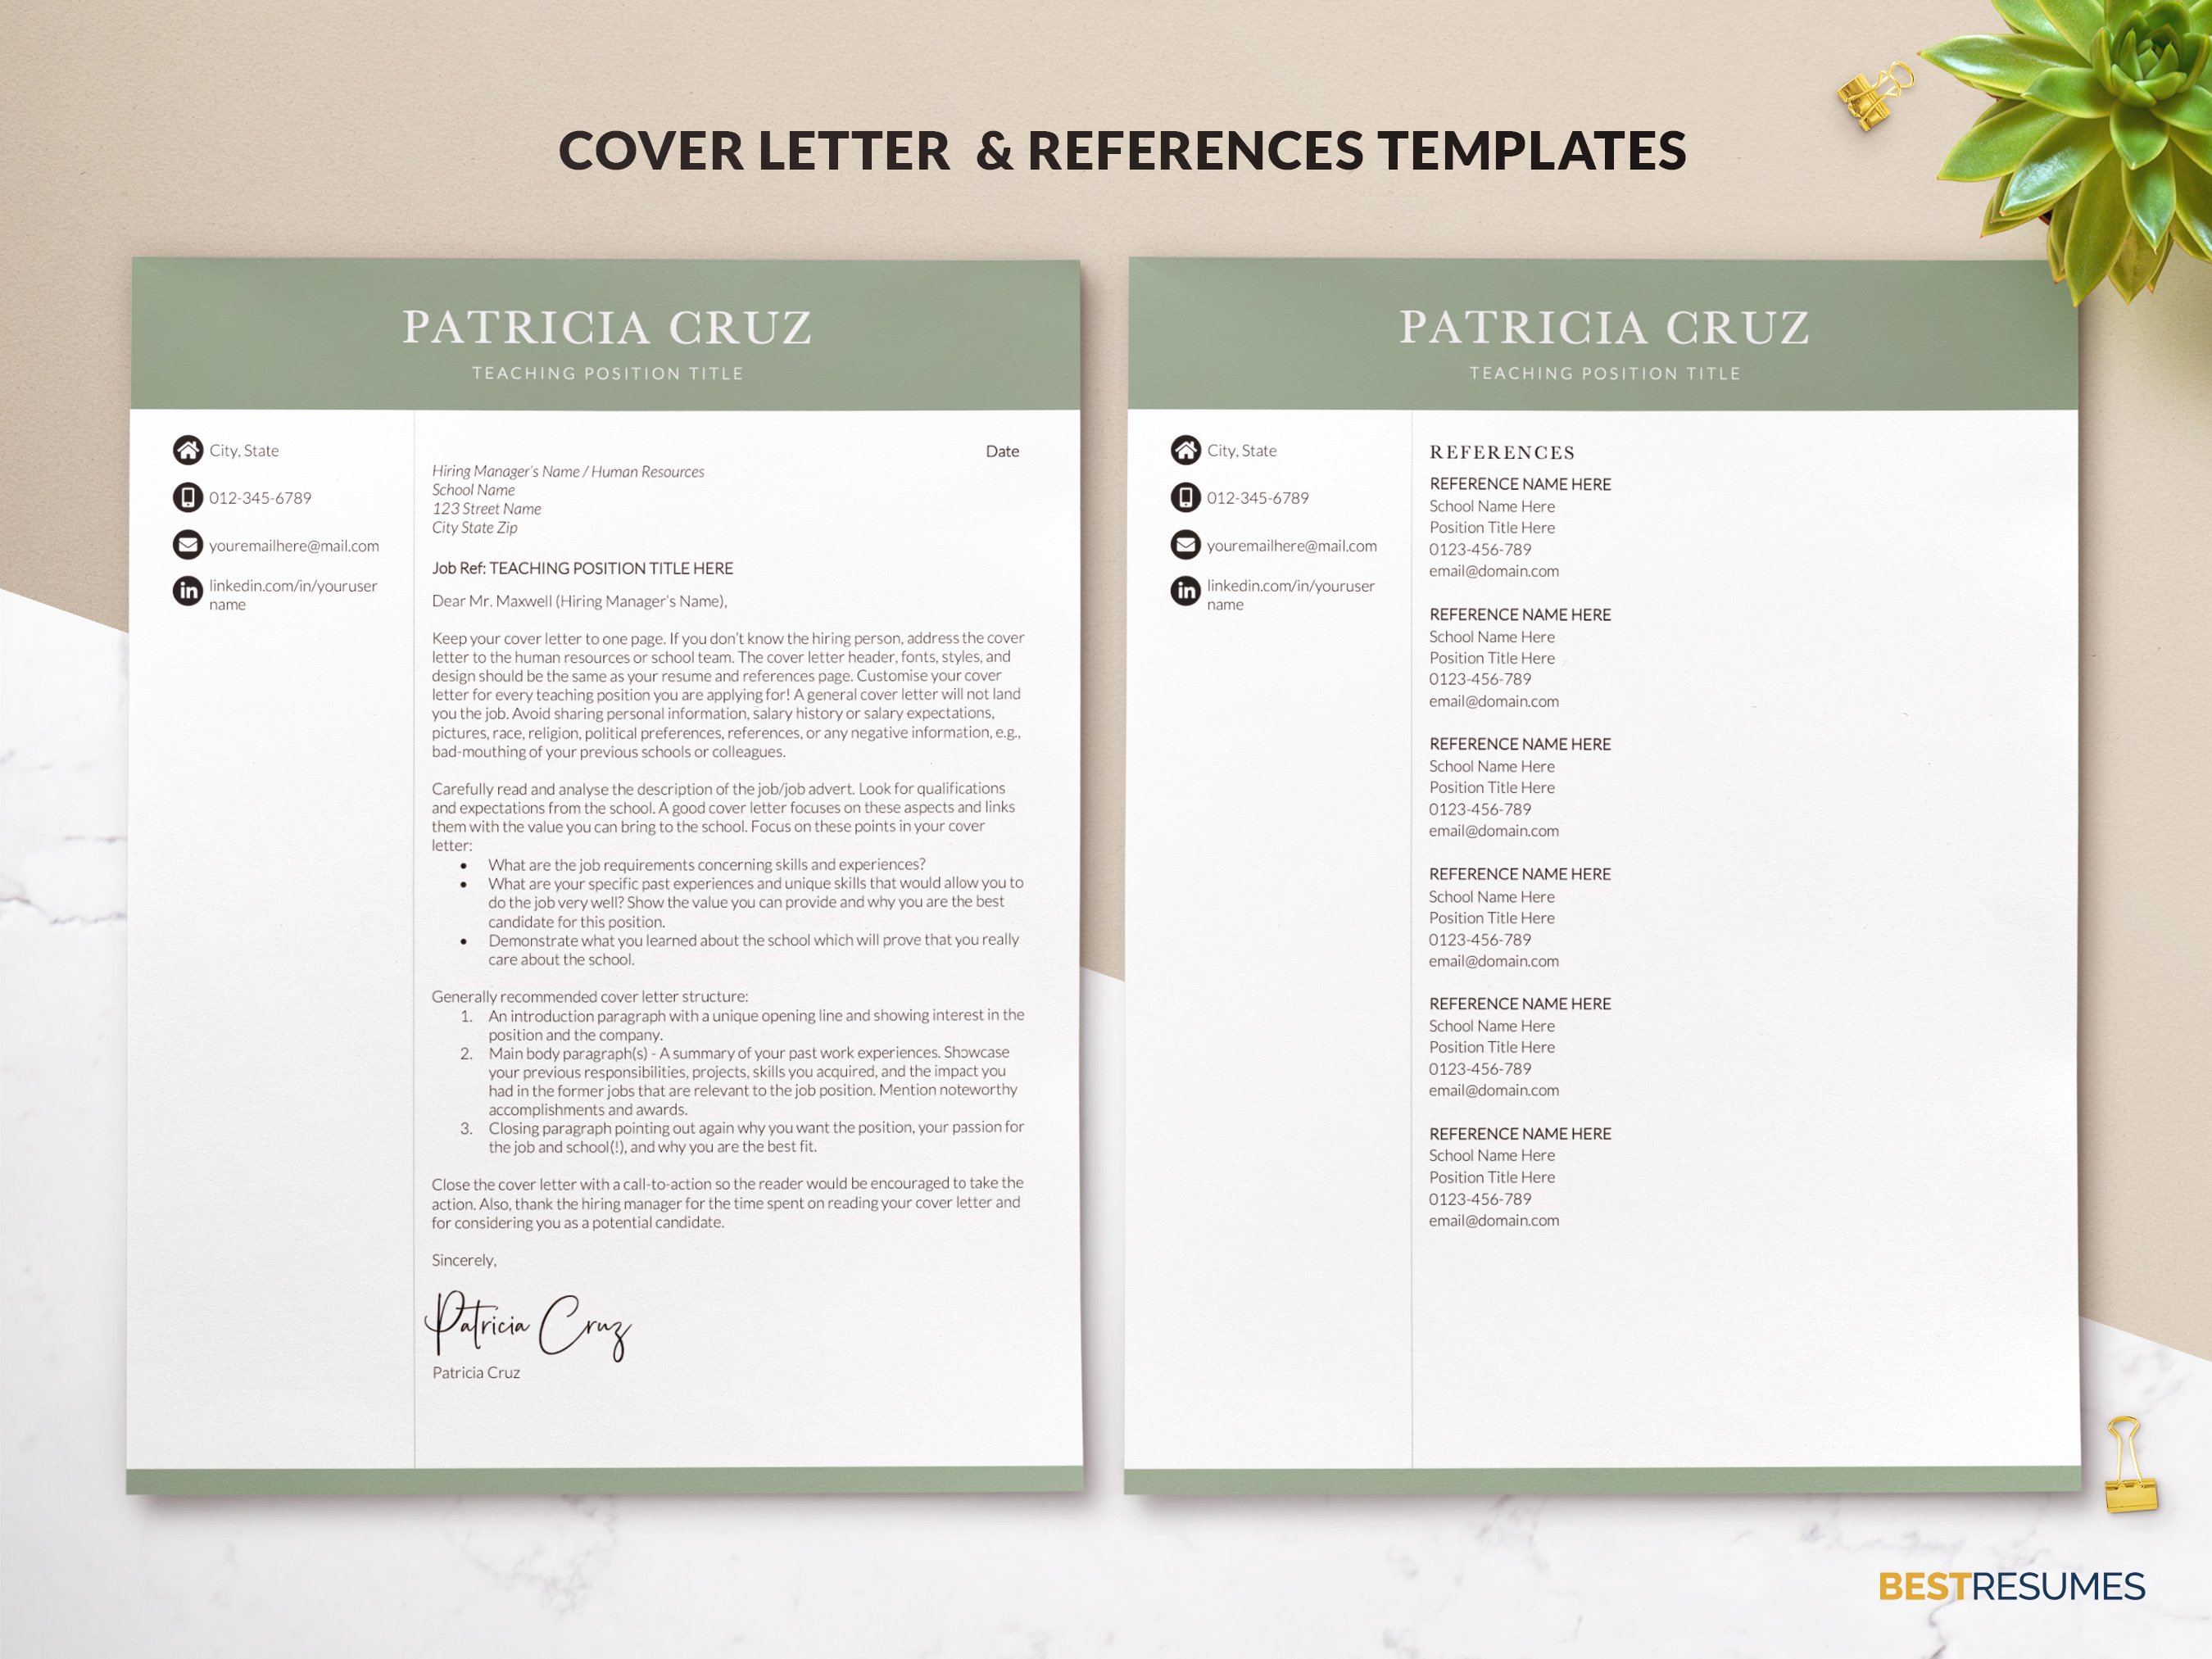 editable teacher resume template cover letter references page patricia cruz 939